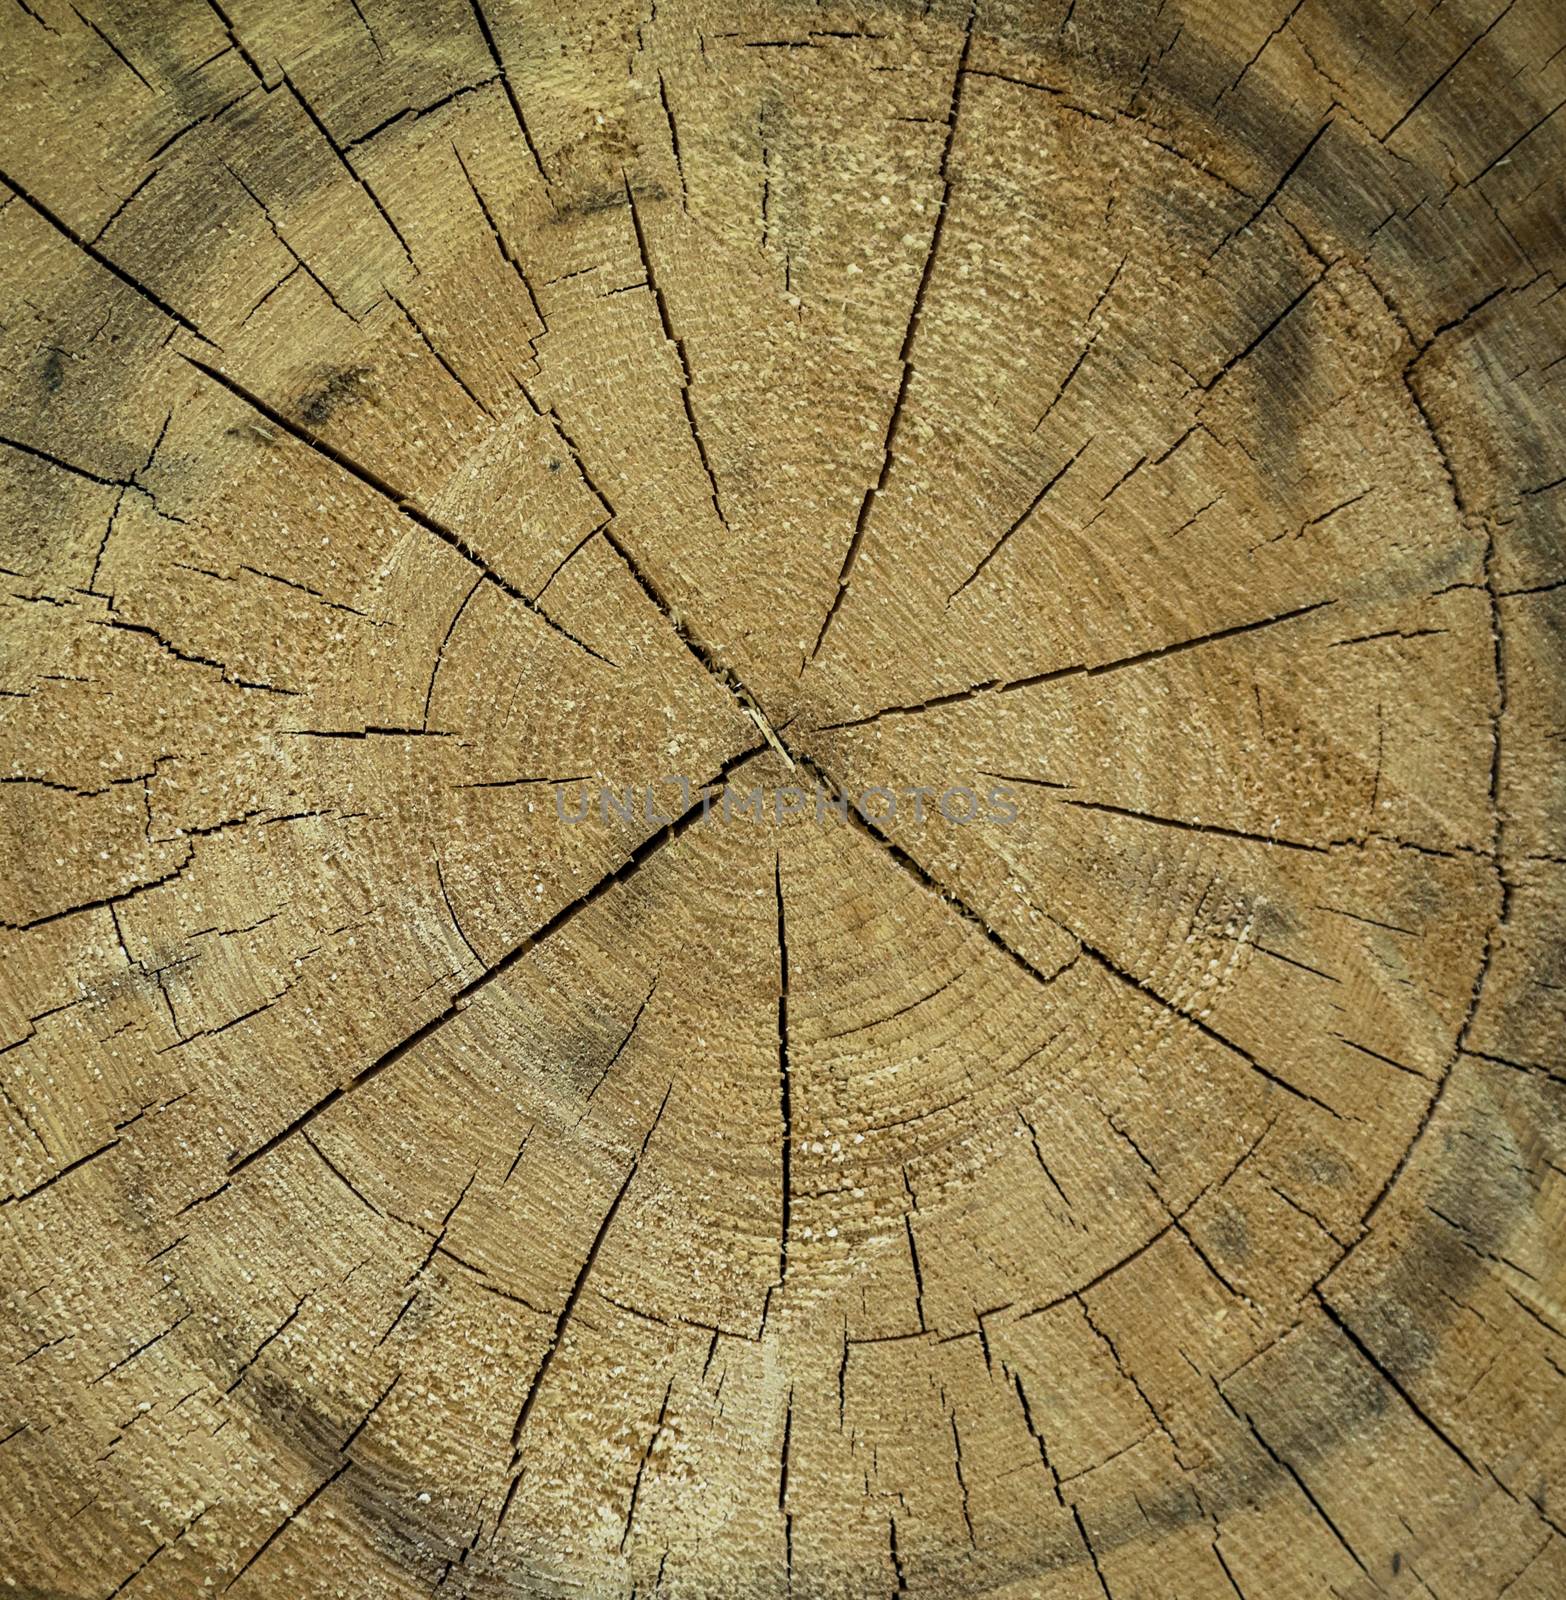 Great for design, wooden texture with the section of a tree trunk, with its rings and cracks